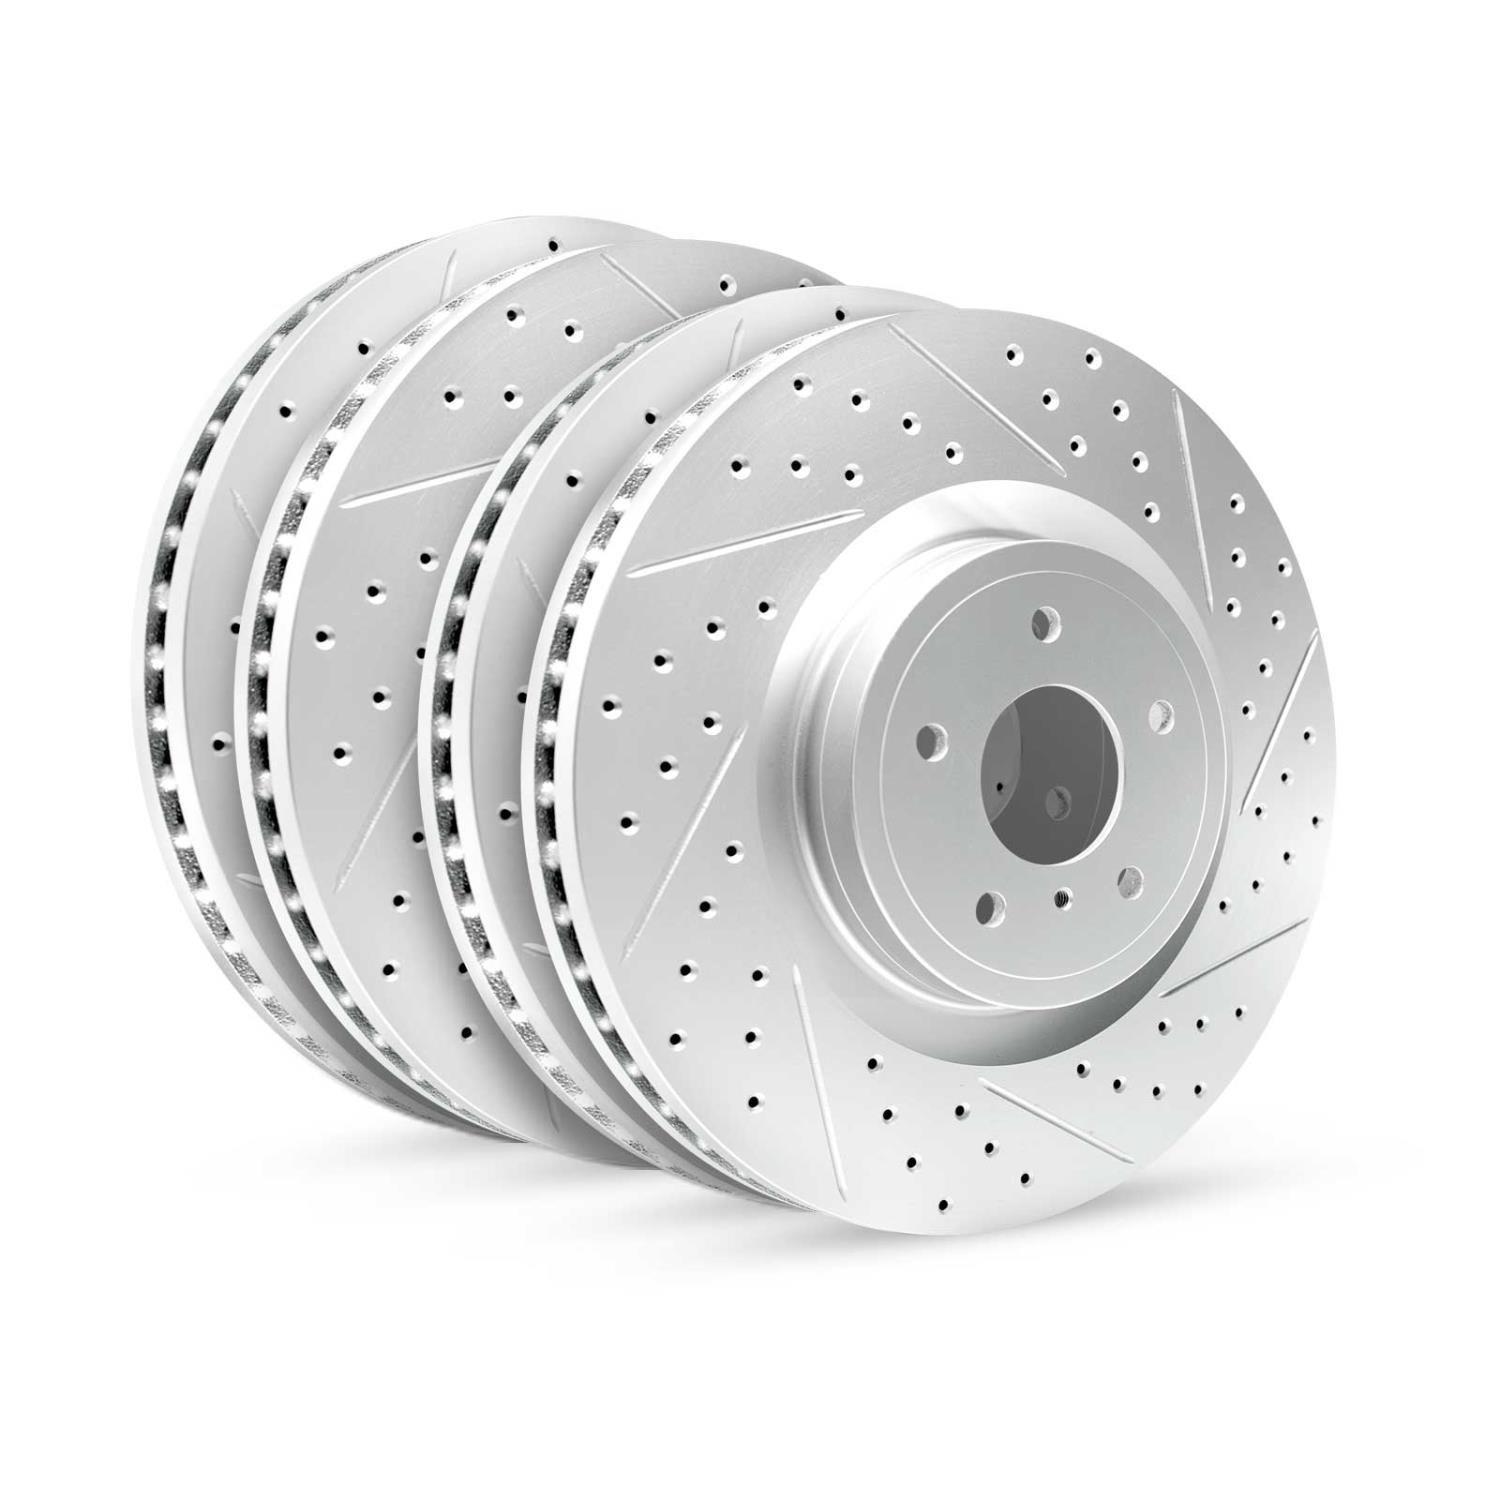 GEO-Carbon Drilled/Slotted Rotors, 1987-1989 Audi/Porsche/Volkswagen, Position: Front/Rear